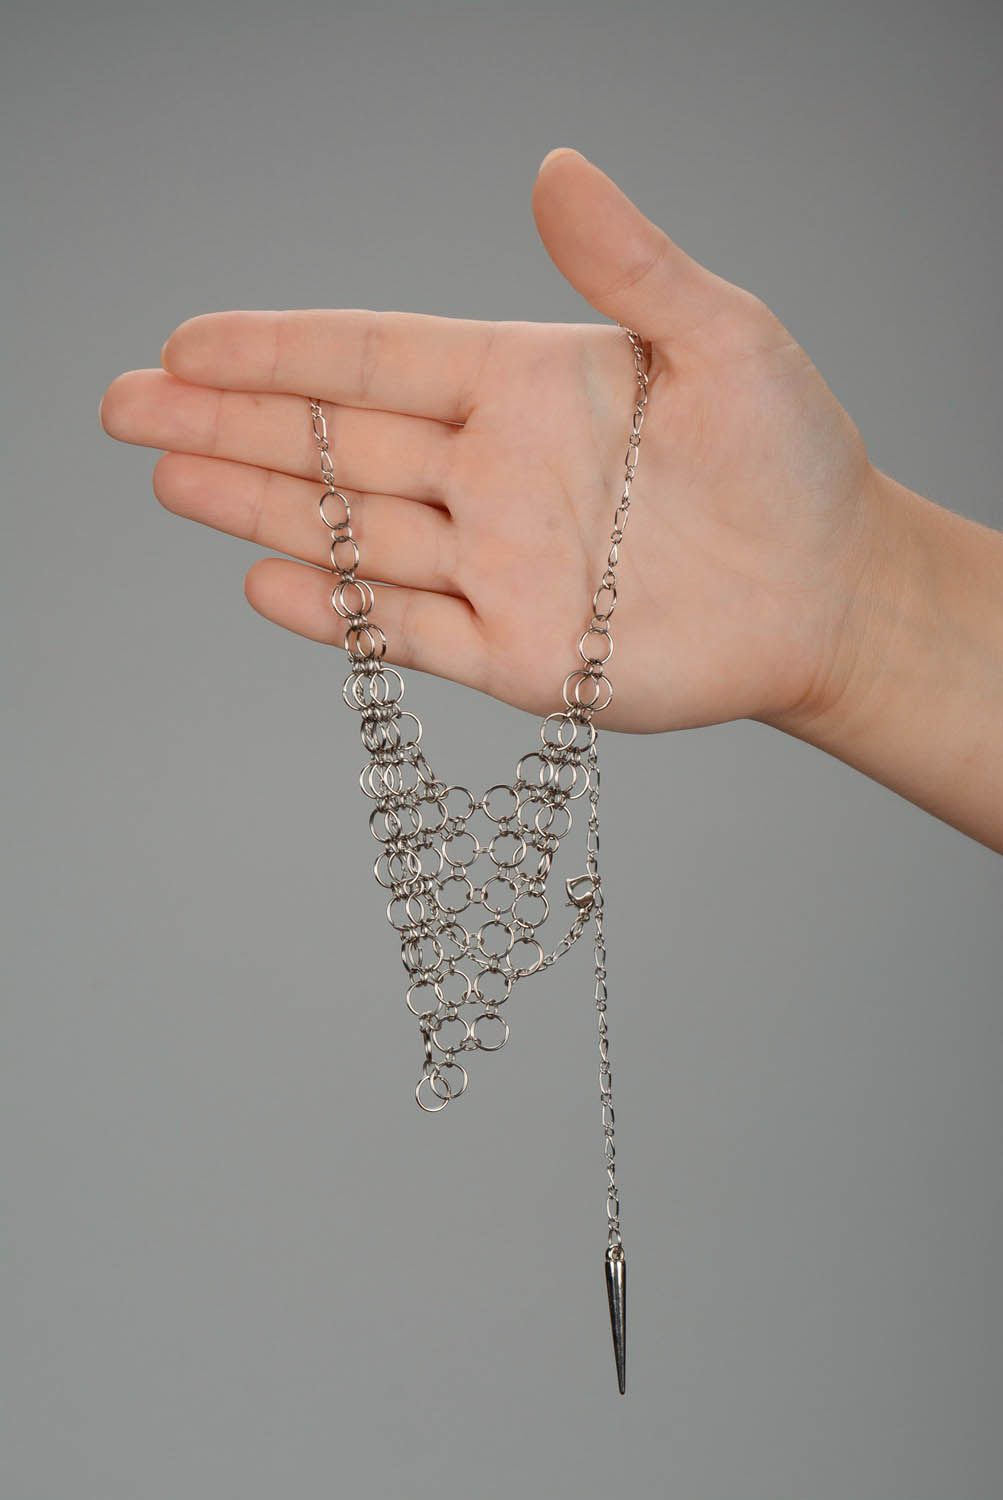 Necklace made of metal rings photo 4